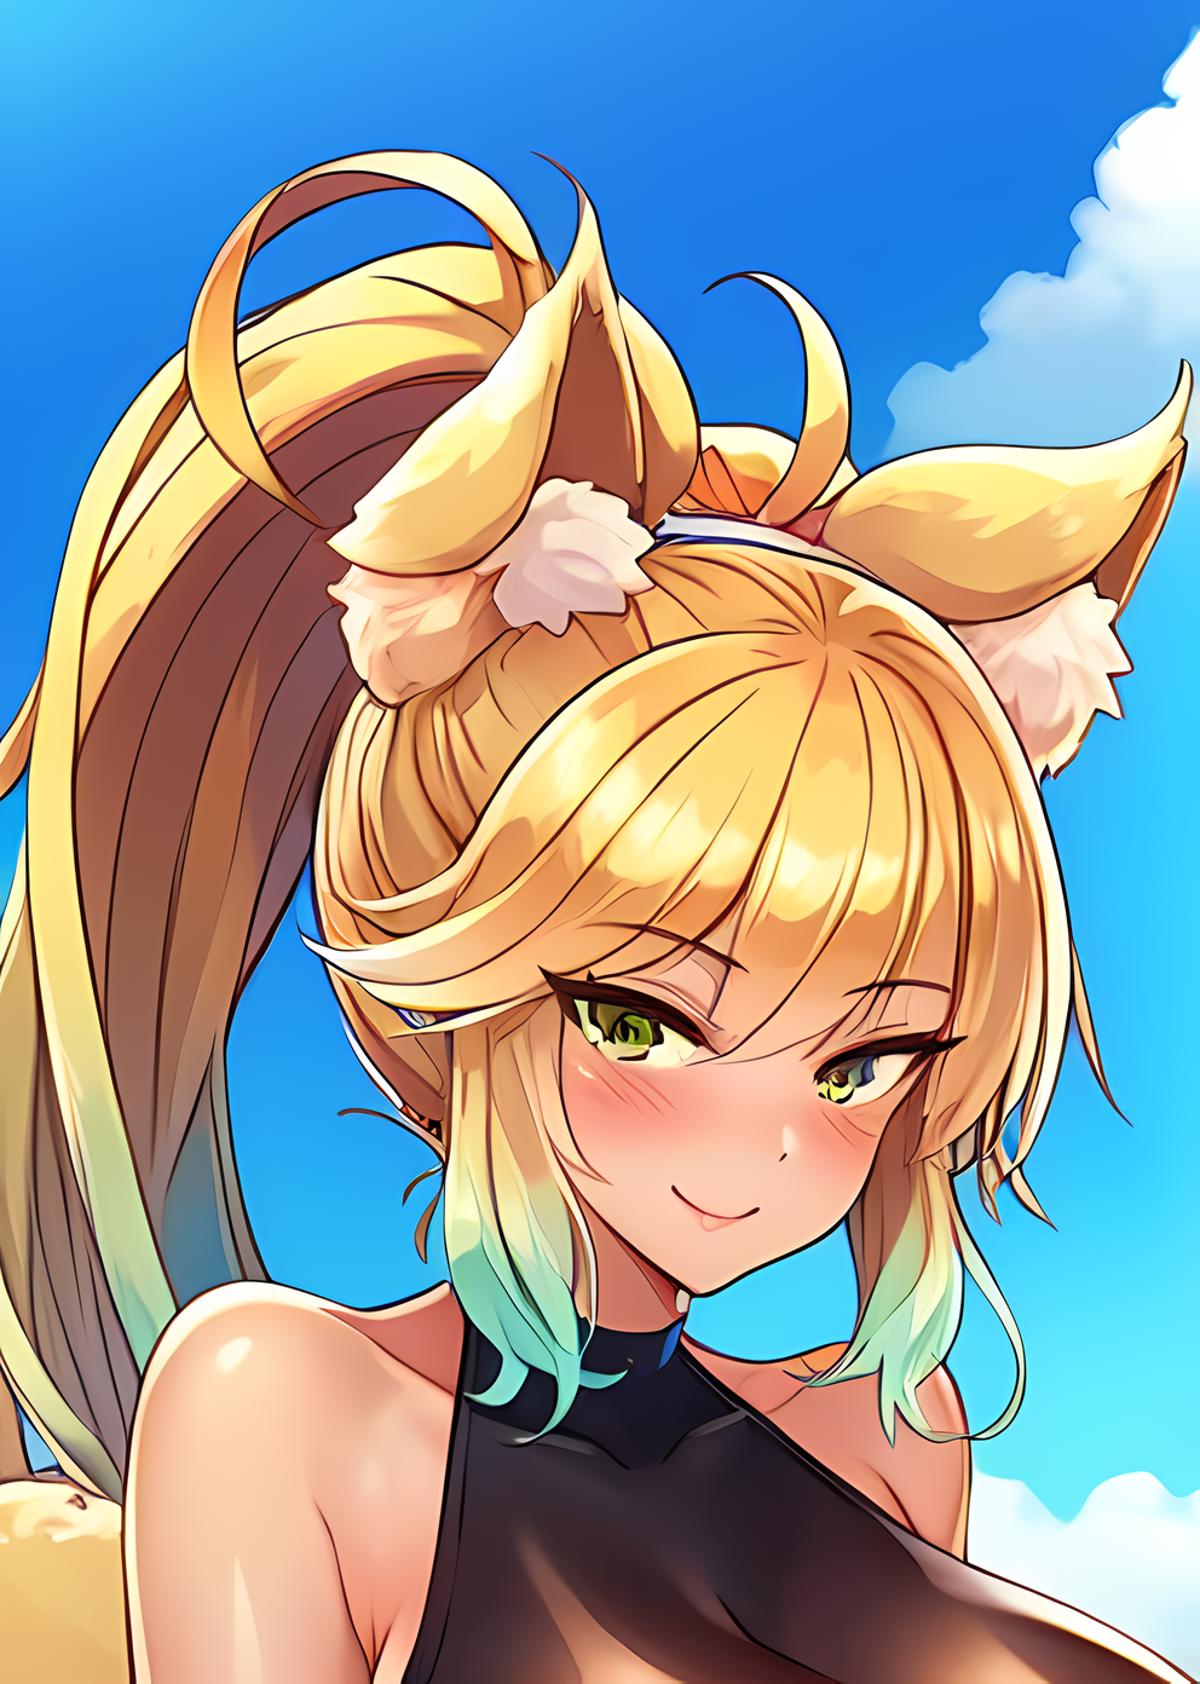 A cartoon girl with cat ears and a ponytail, smiling for the camera.